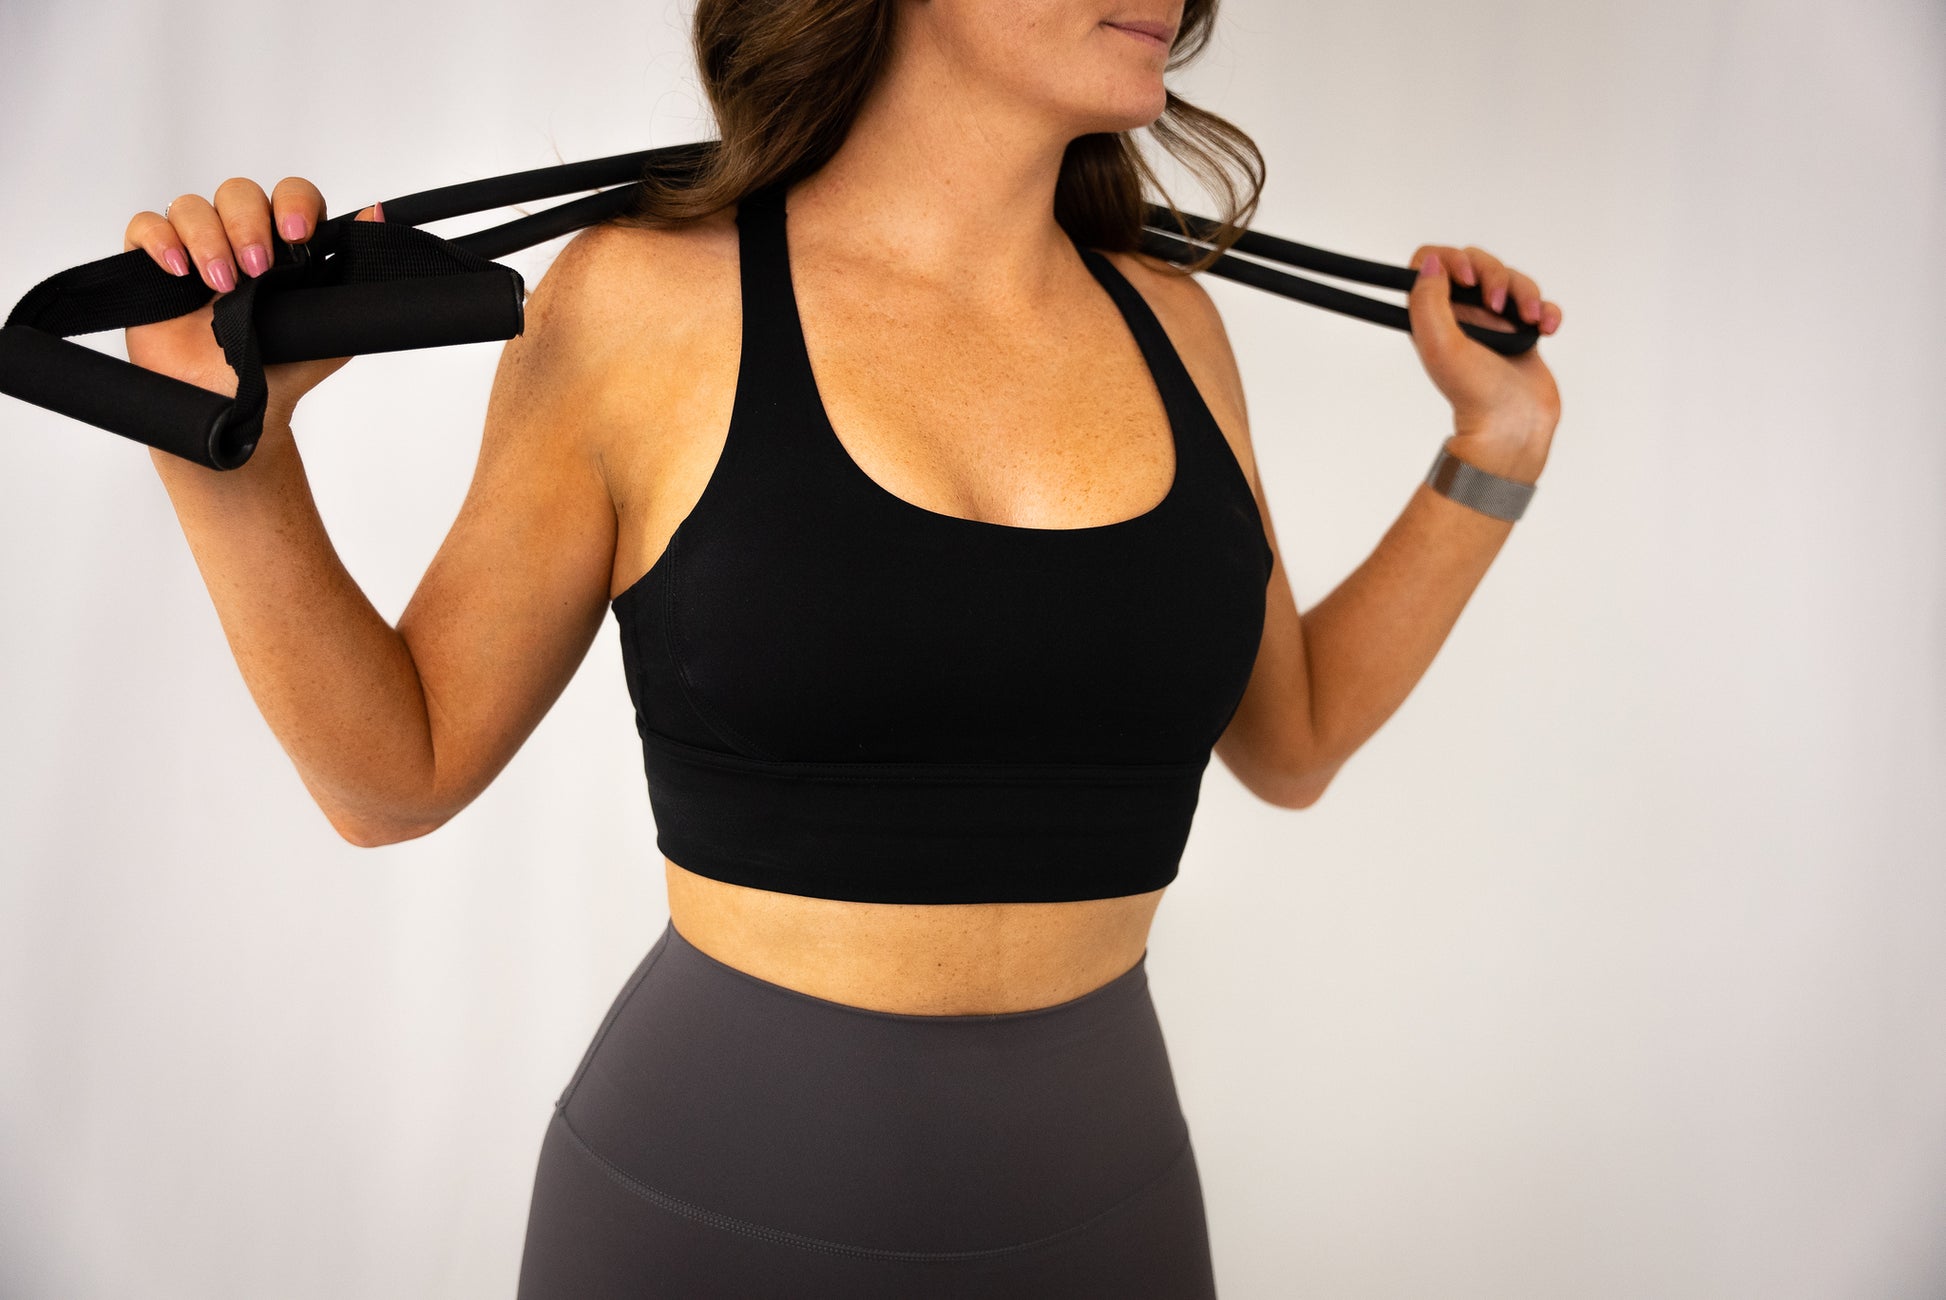 Concealed Carry Convertible Sports Bra, Best Glock Accessories